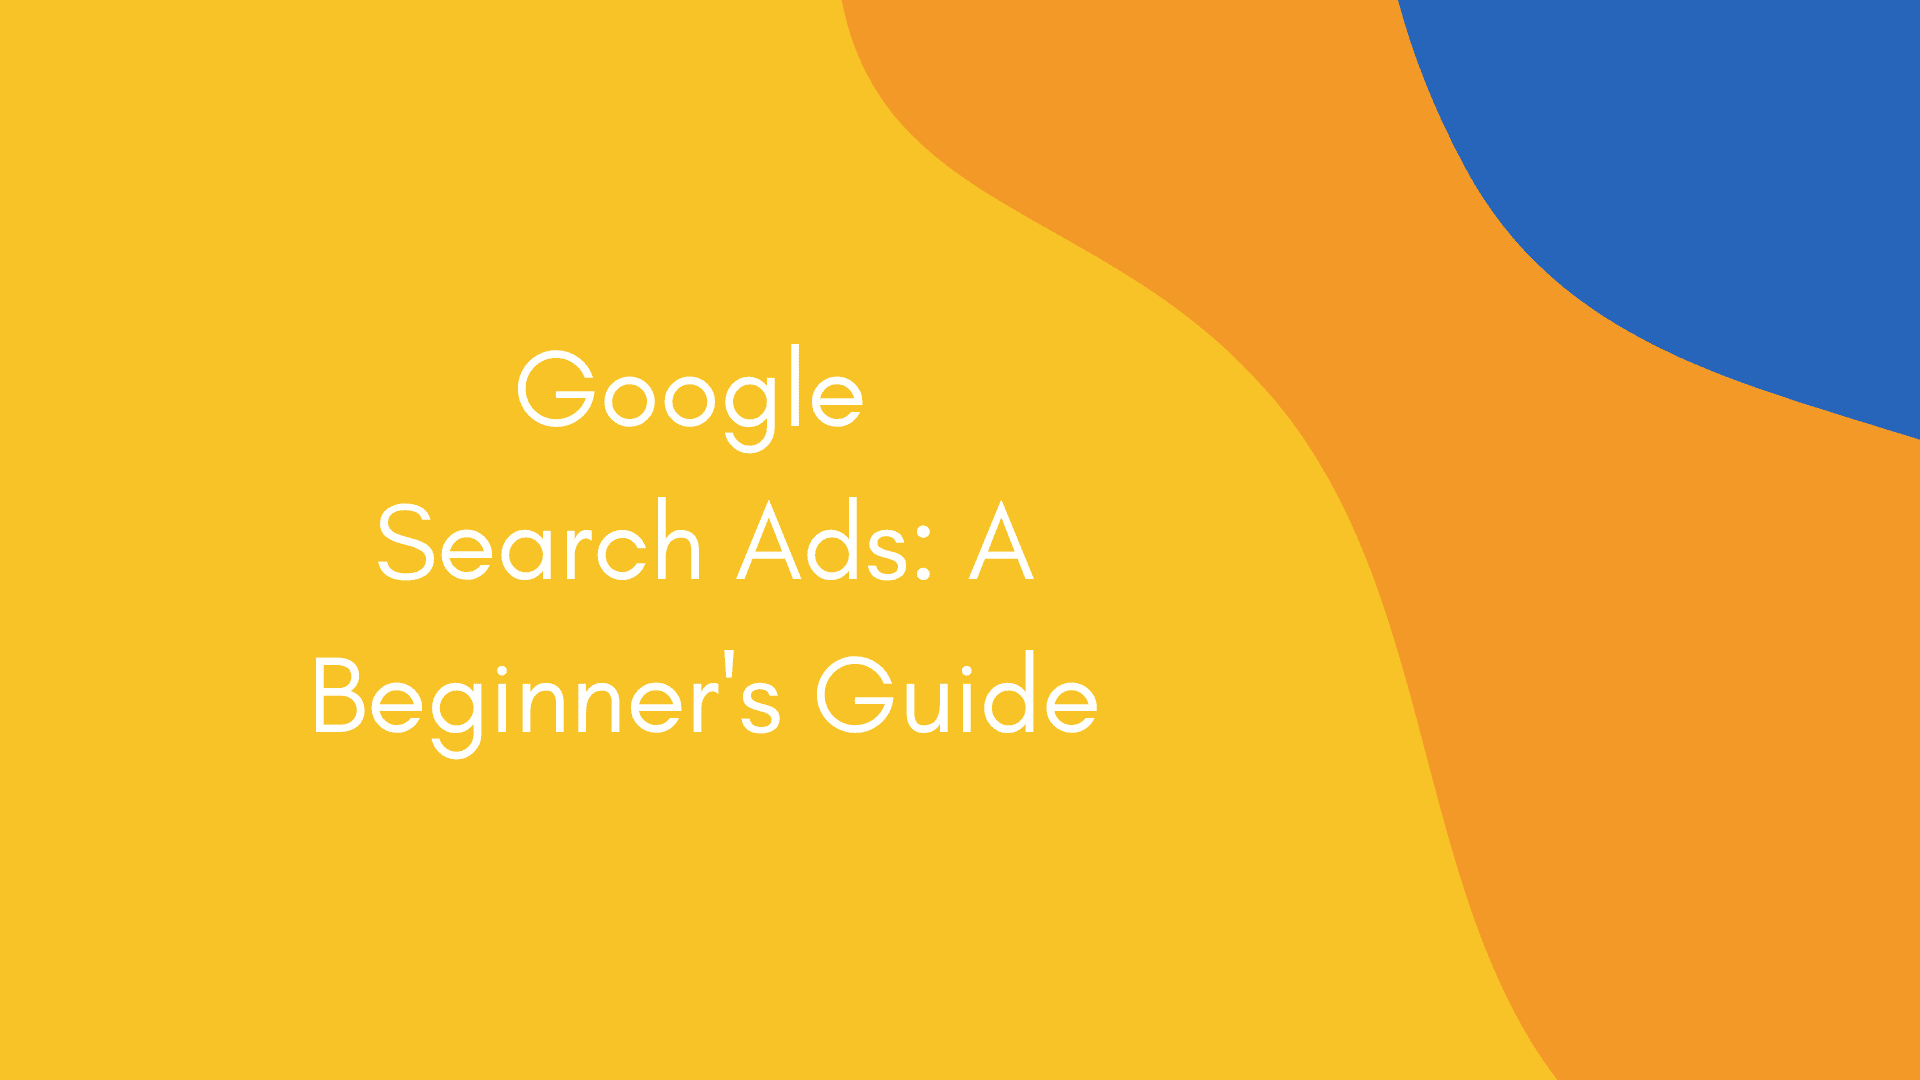 Google Search Ads- A Beginner's Guide